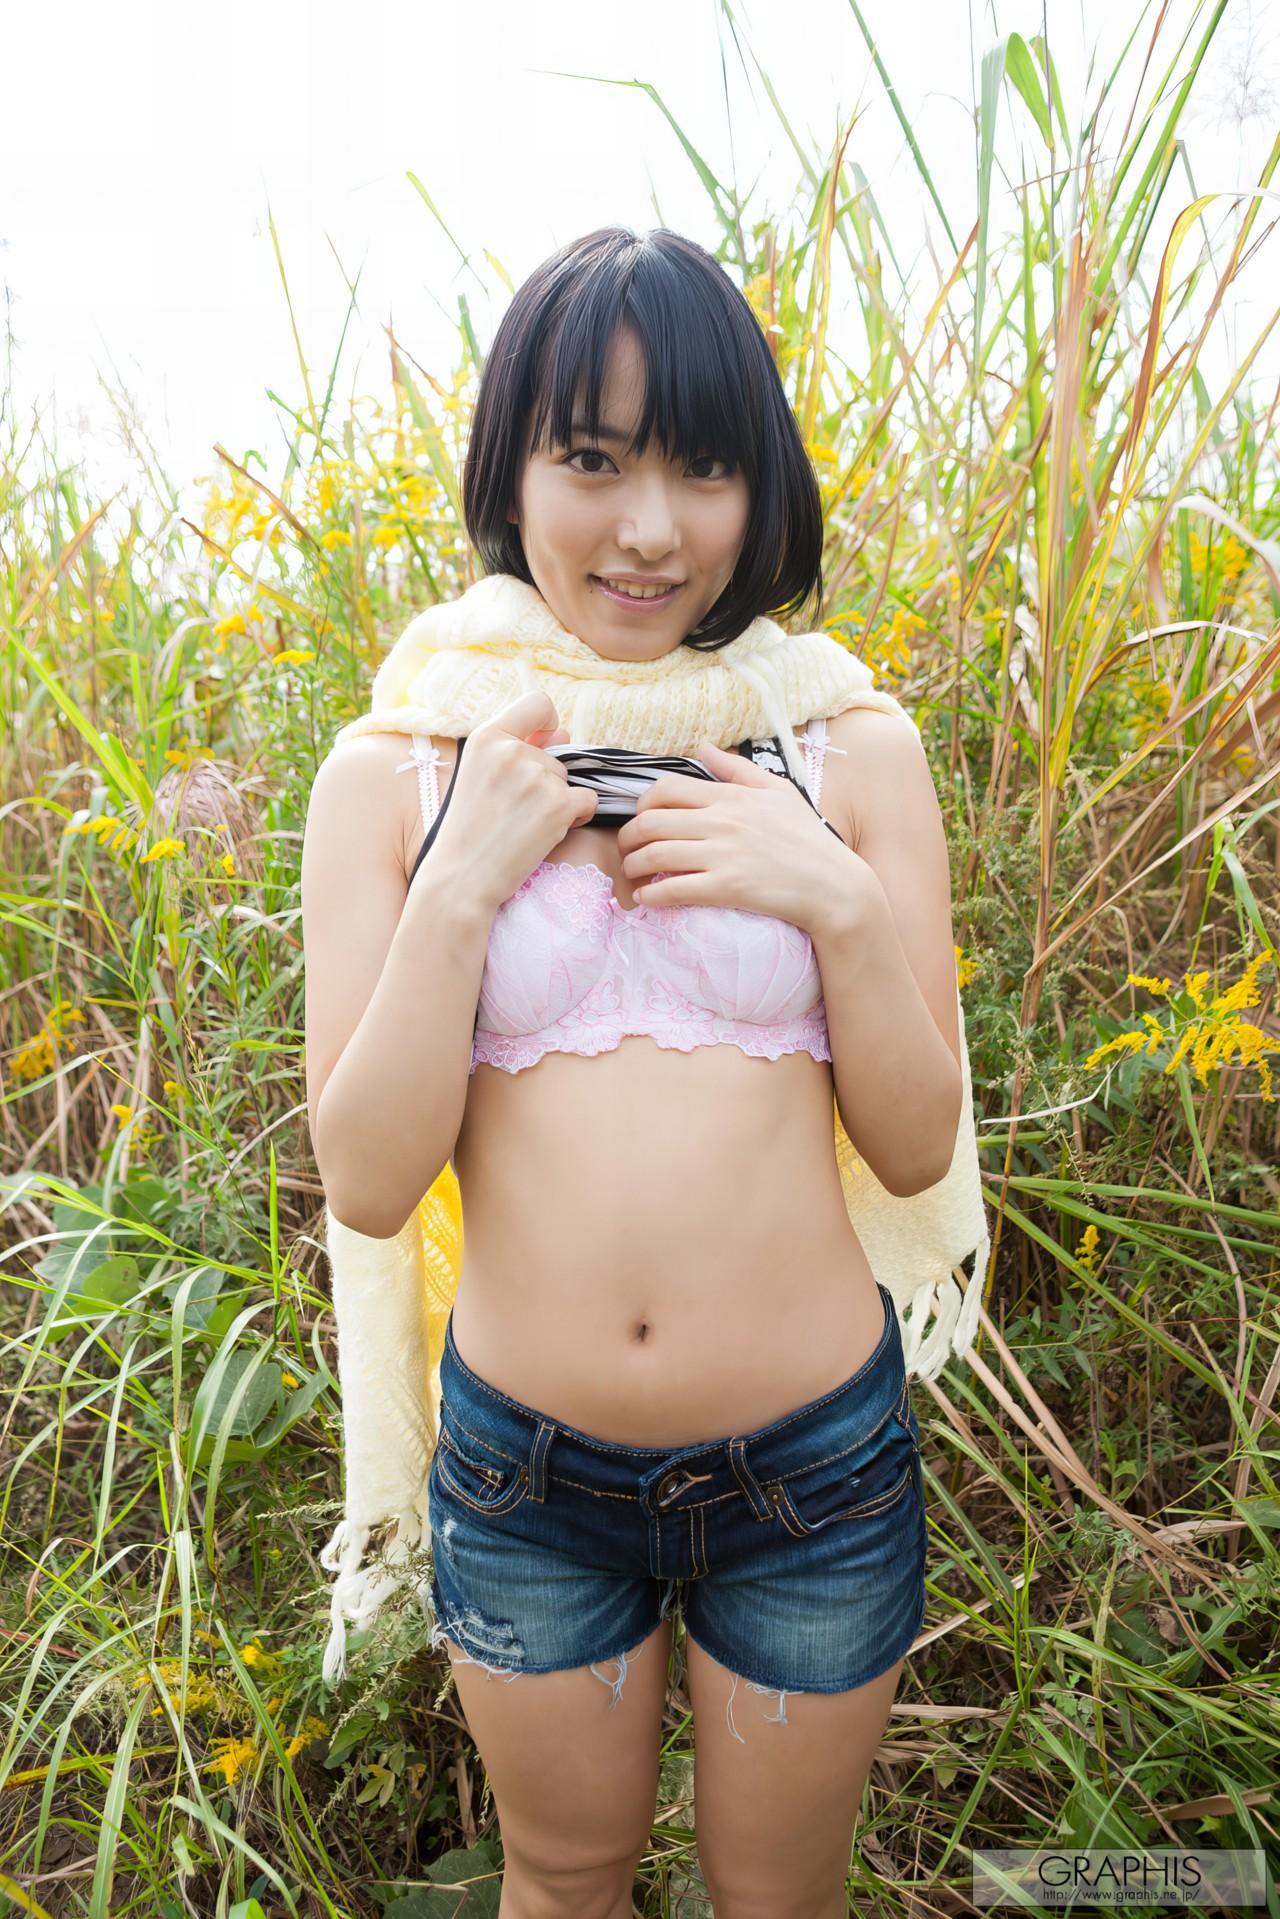 Kana Yume 由愛可奈, Graphis Special Contents [A to Z] Vol.01(8)